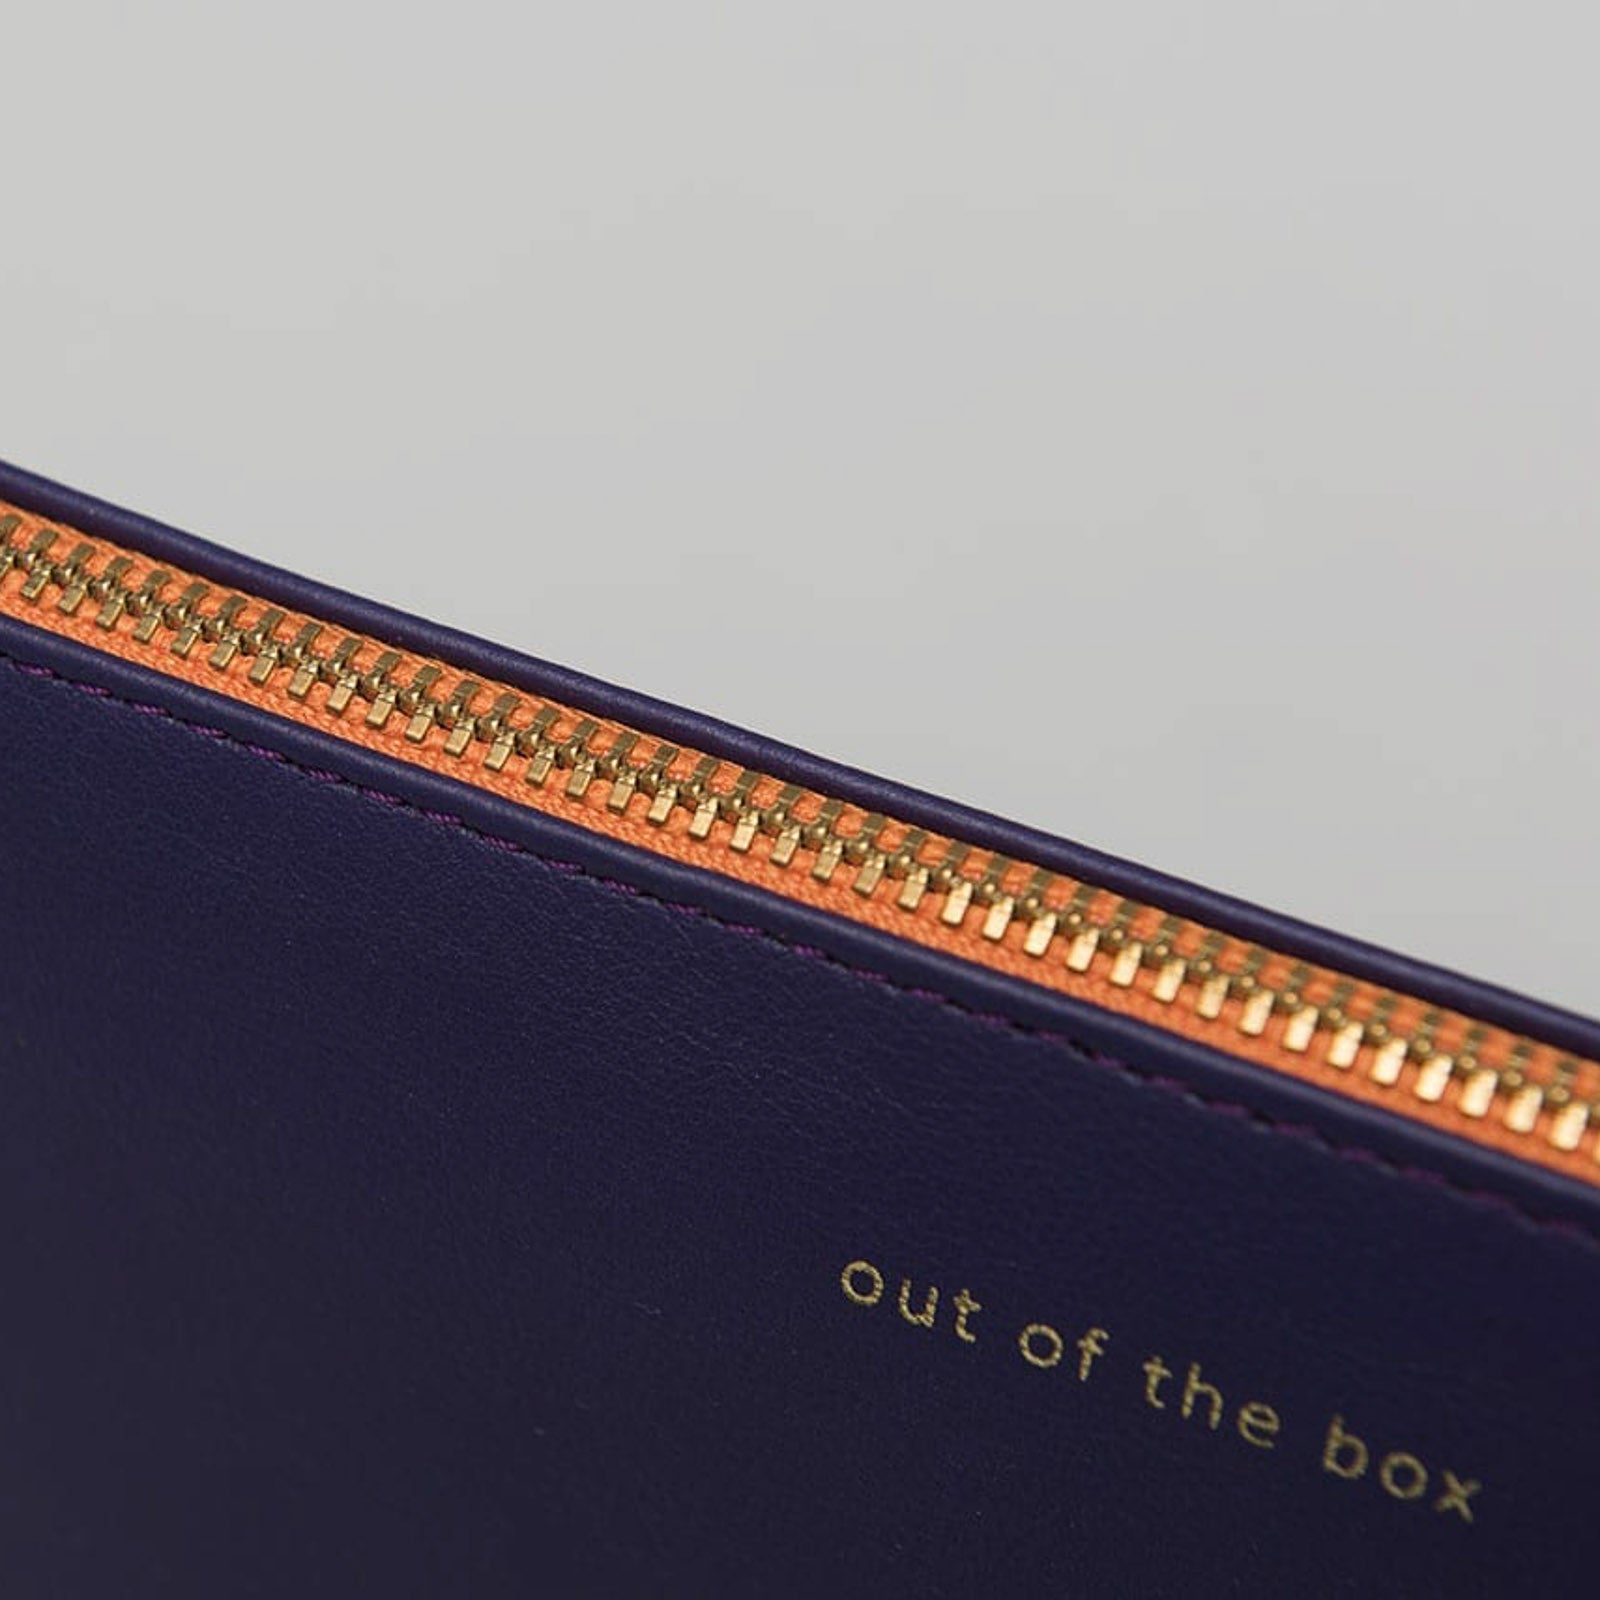 Pouch LRG "Out of the Box"